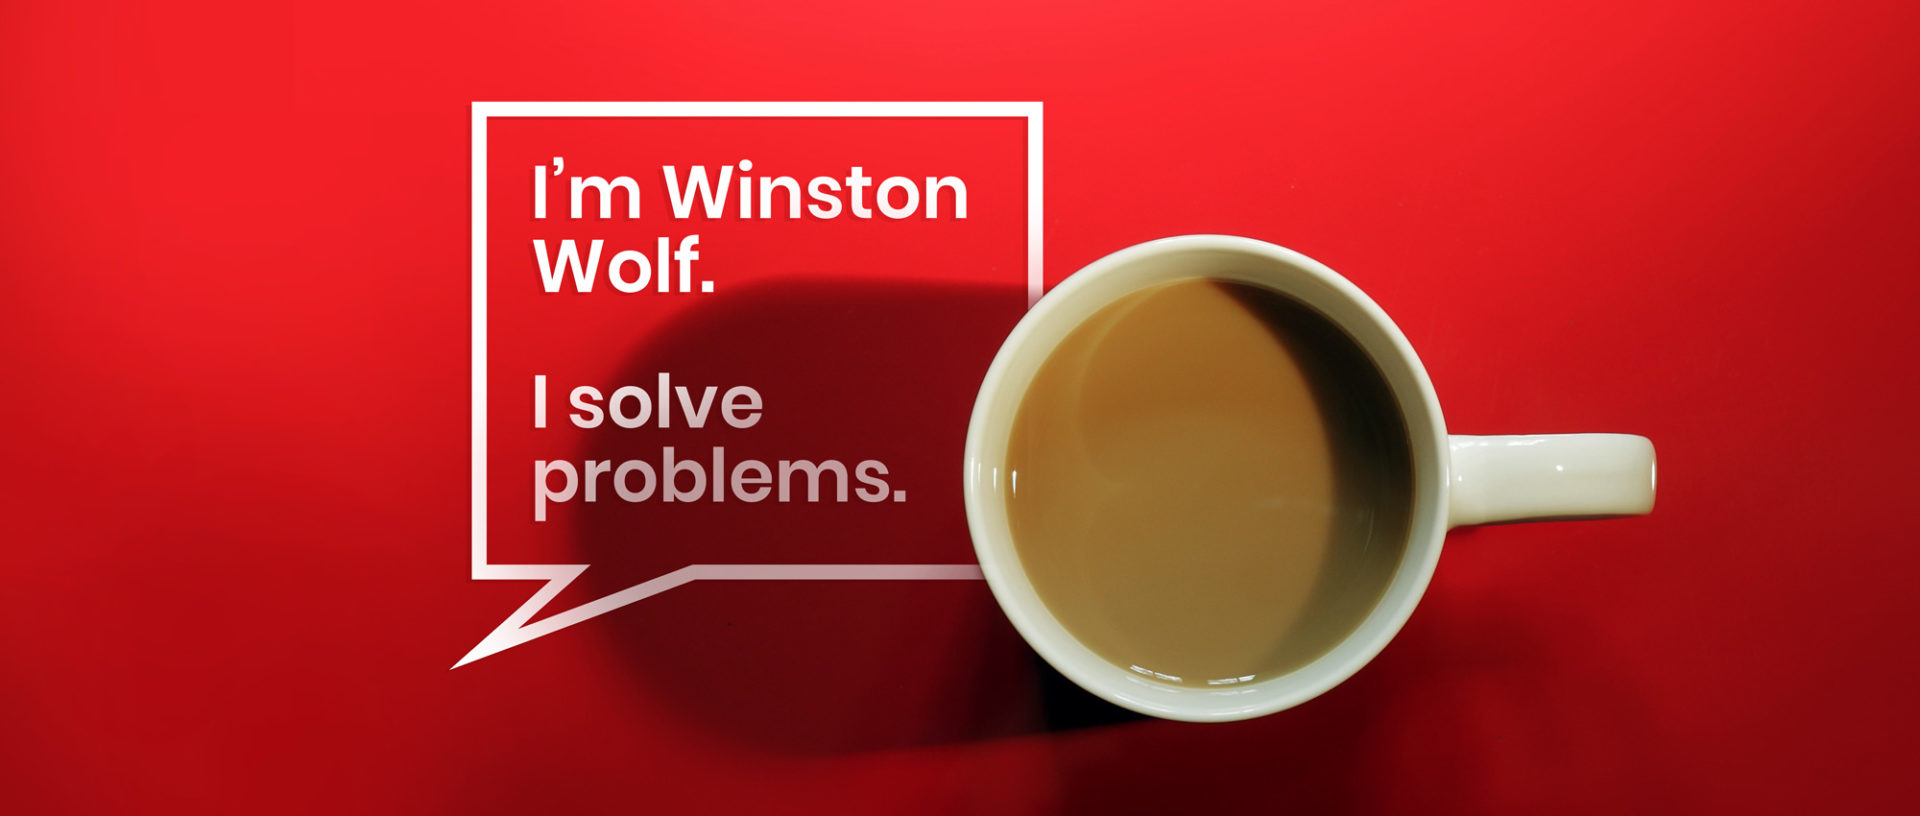 Be the Wolf: Solve Problems - Astute Communications